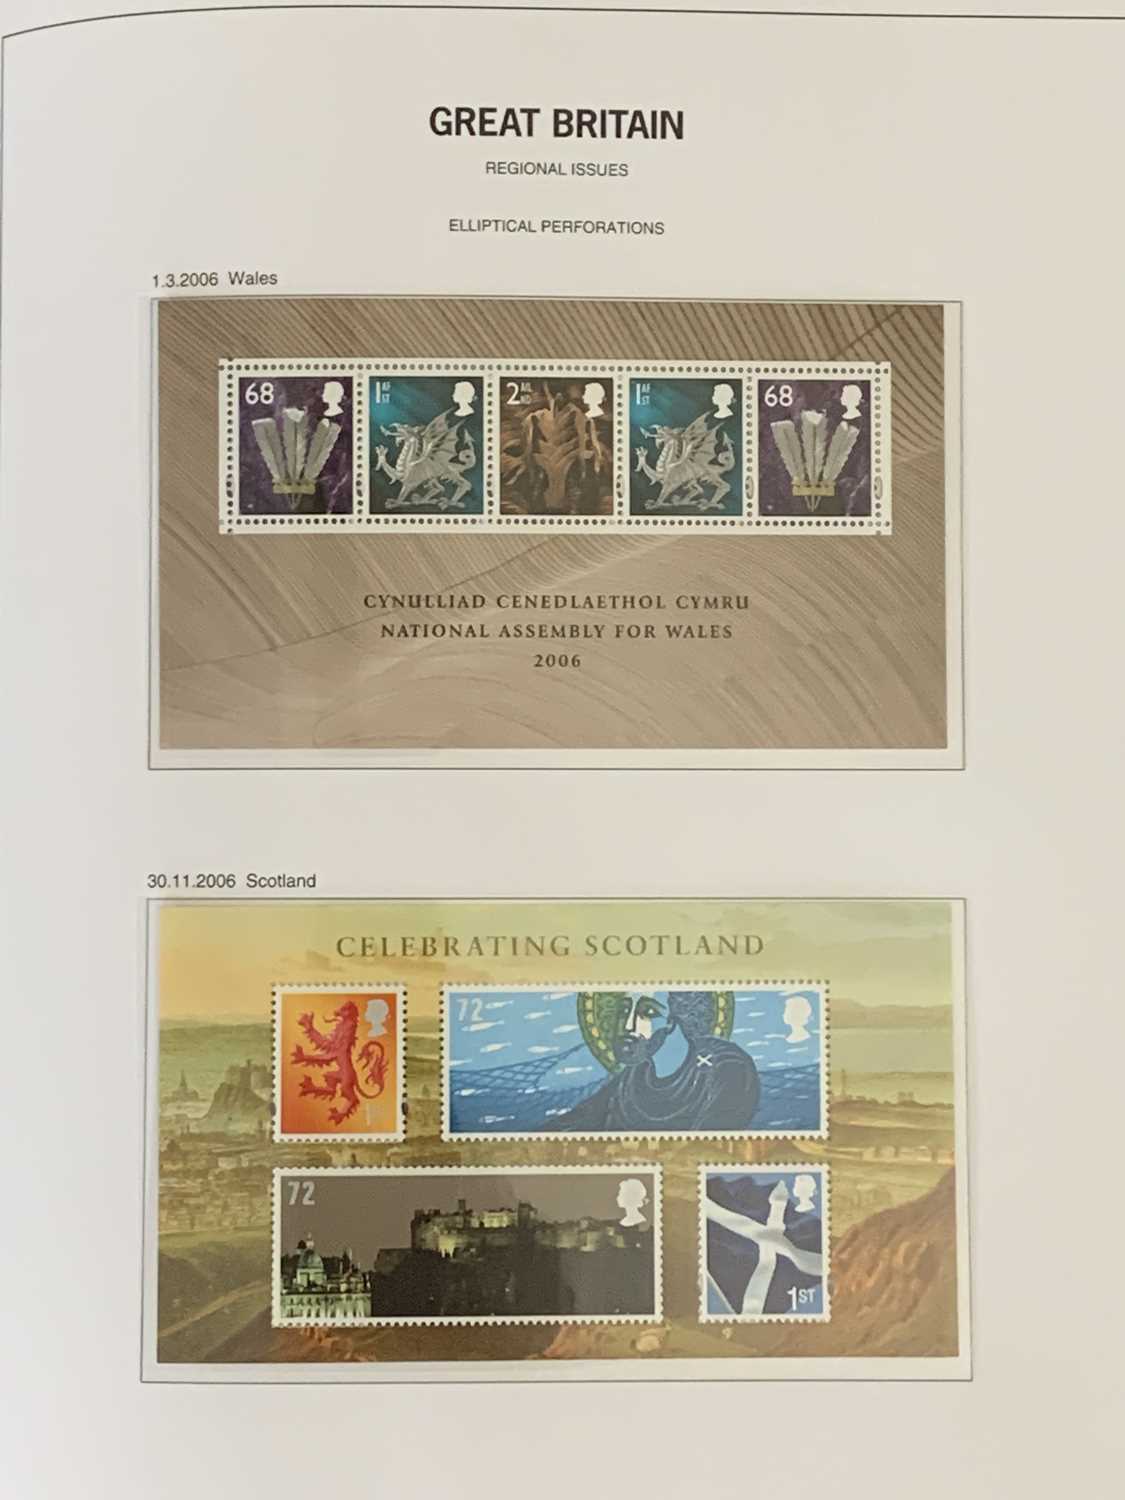 STAMPS - STANLEY GIBBONS ALBUM WITH SLIP - GB mint commemoratives 2000-2007, appears complete - Image 14 of 15